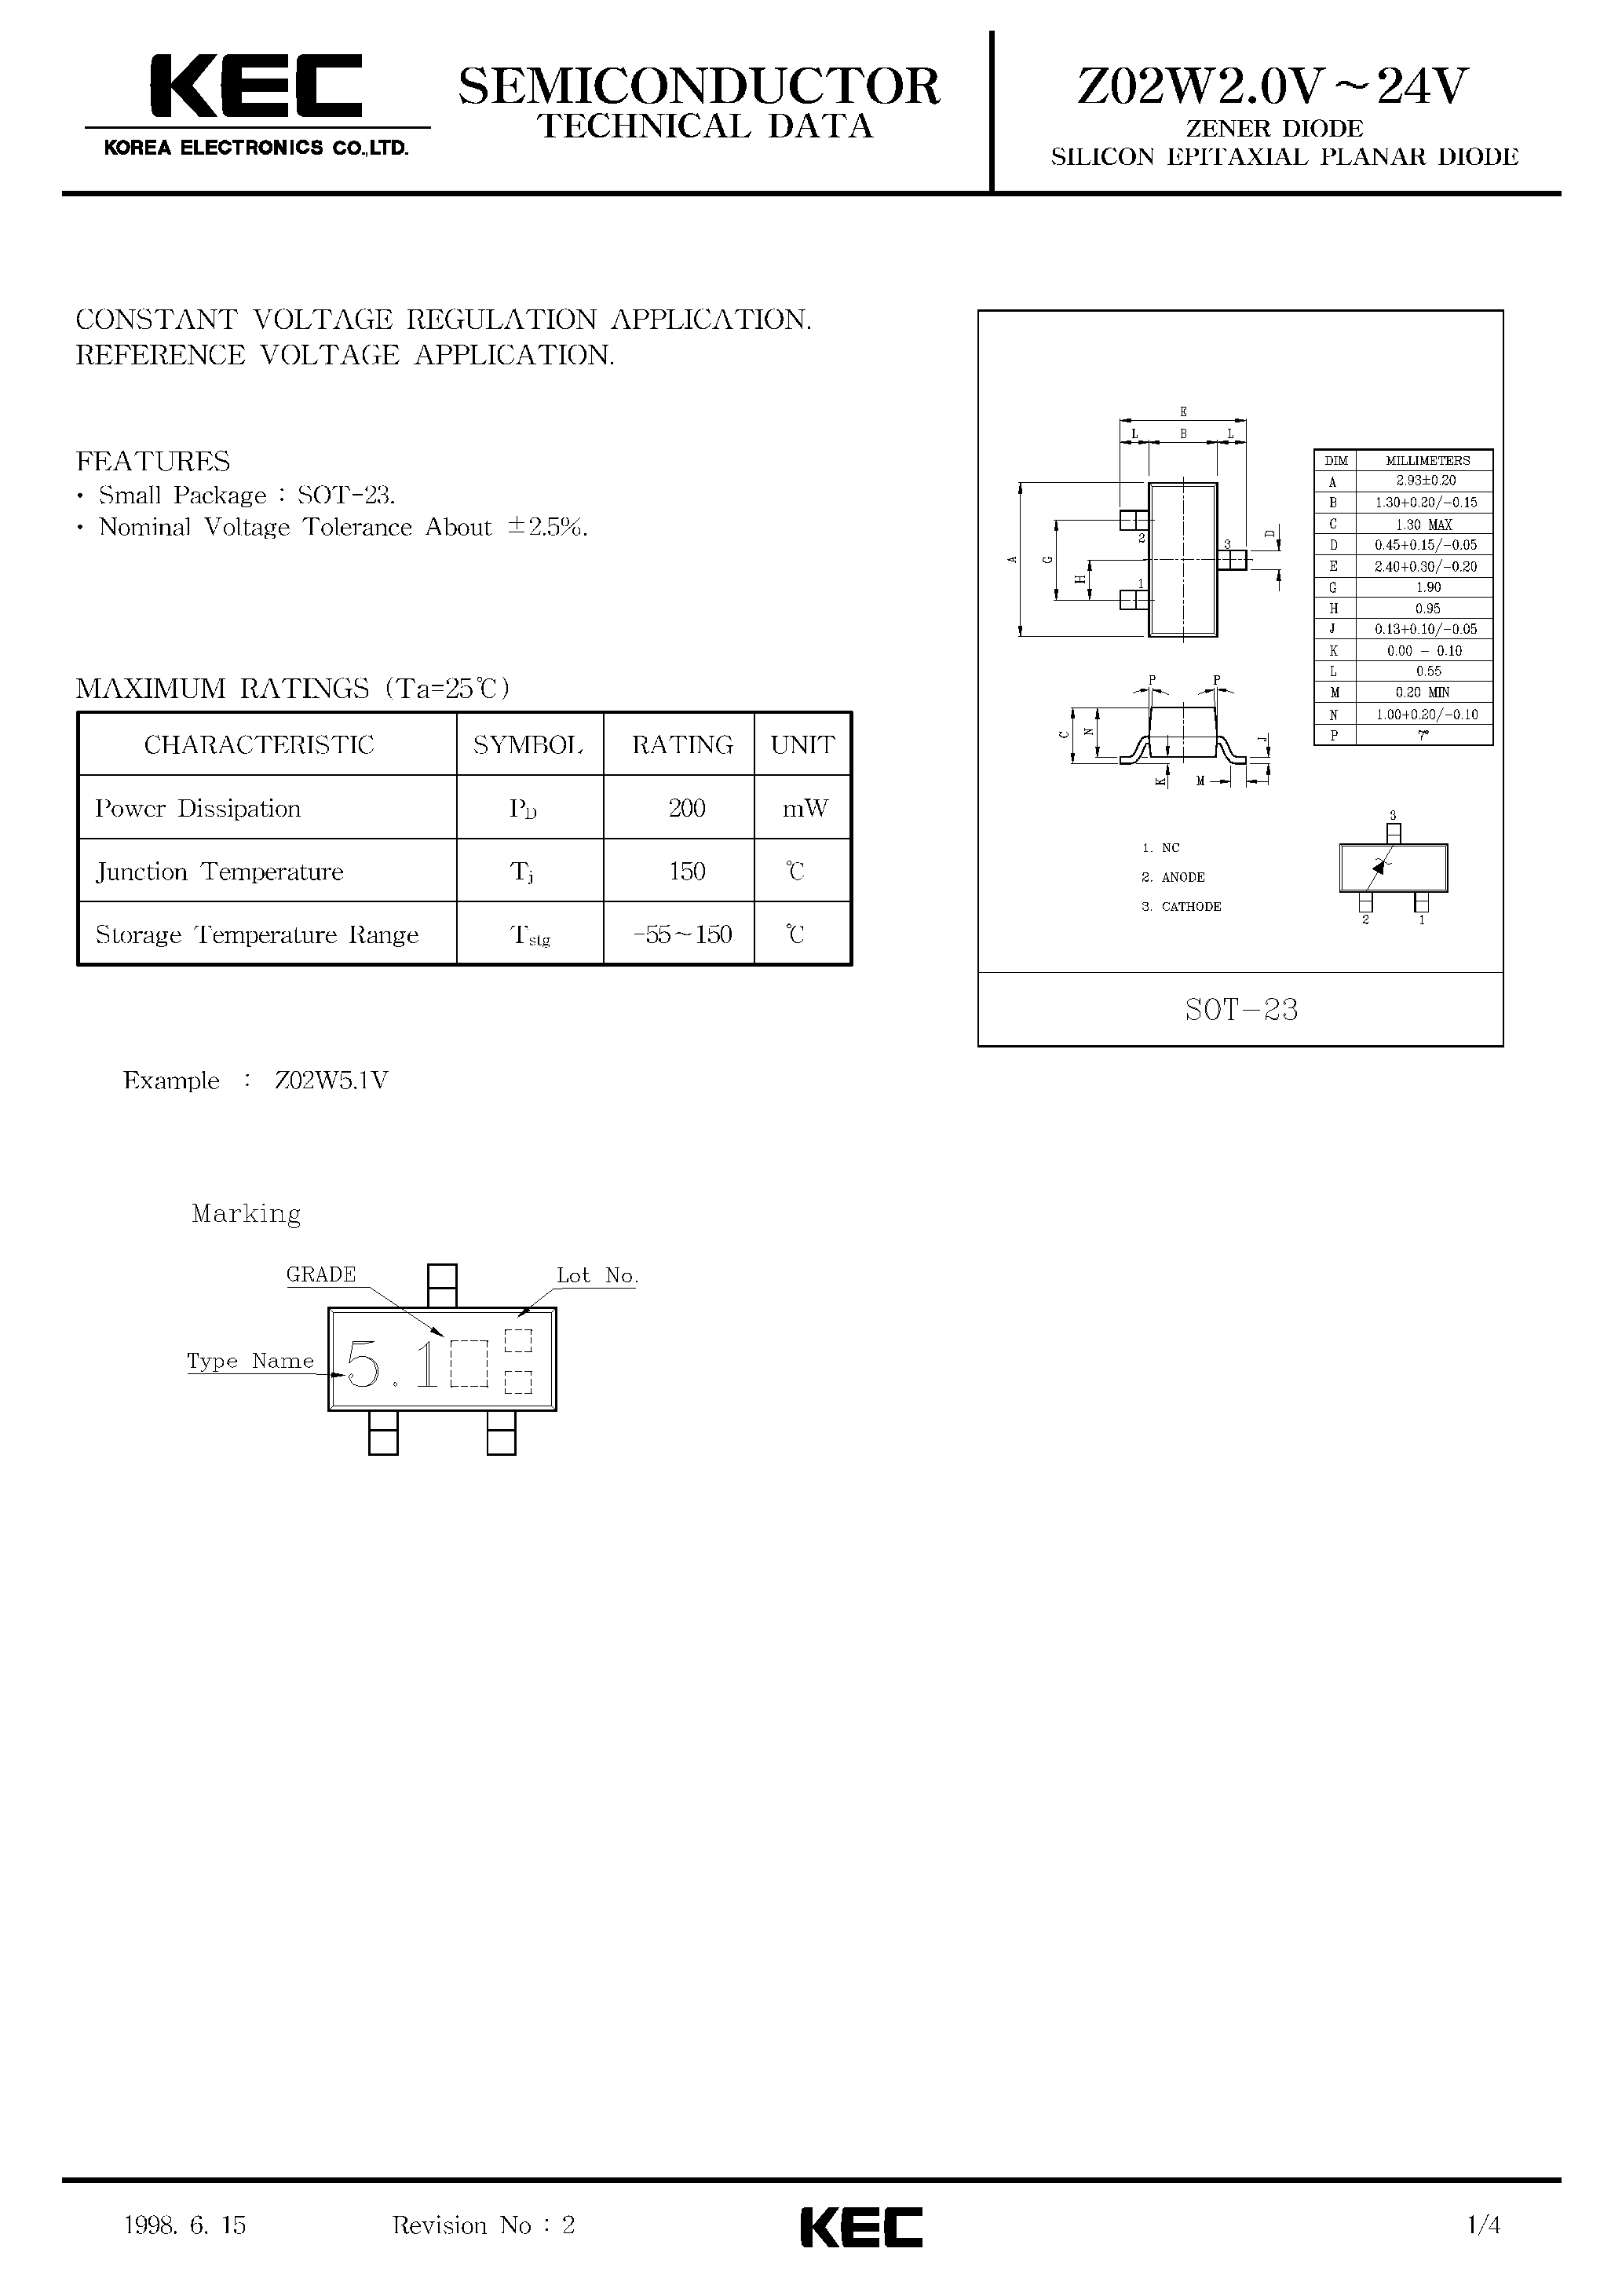 Datasheet Z02W4.7V - ZENER DIODE SILICON EPITAXIAL PLANAR DIODE page 1